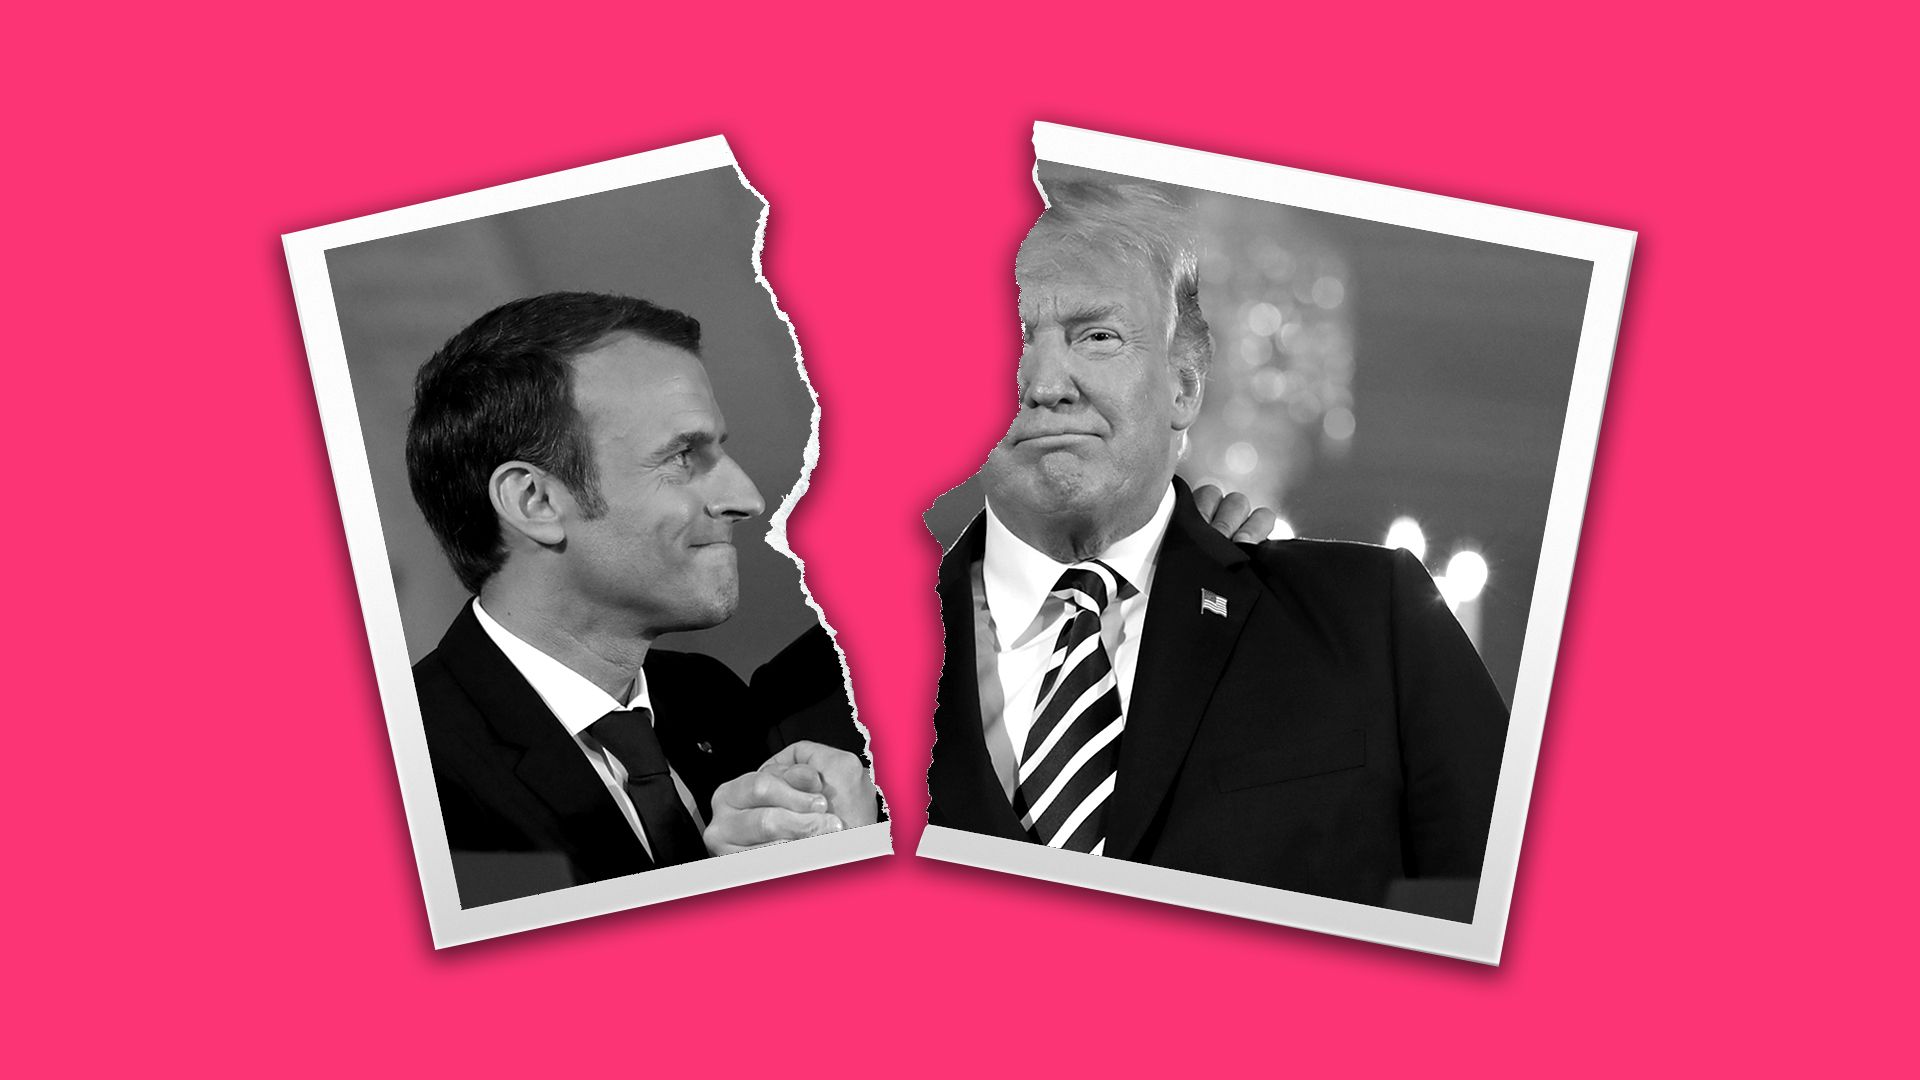 Illustration of torn photo of President Trump and President Macron